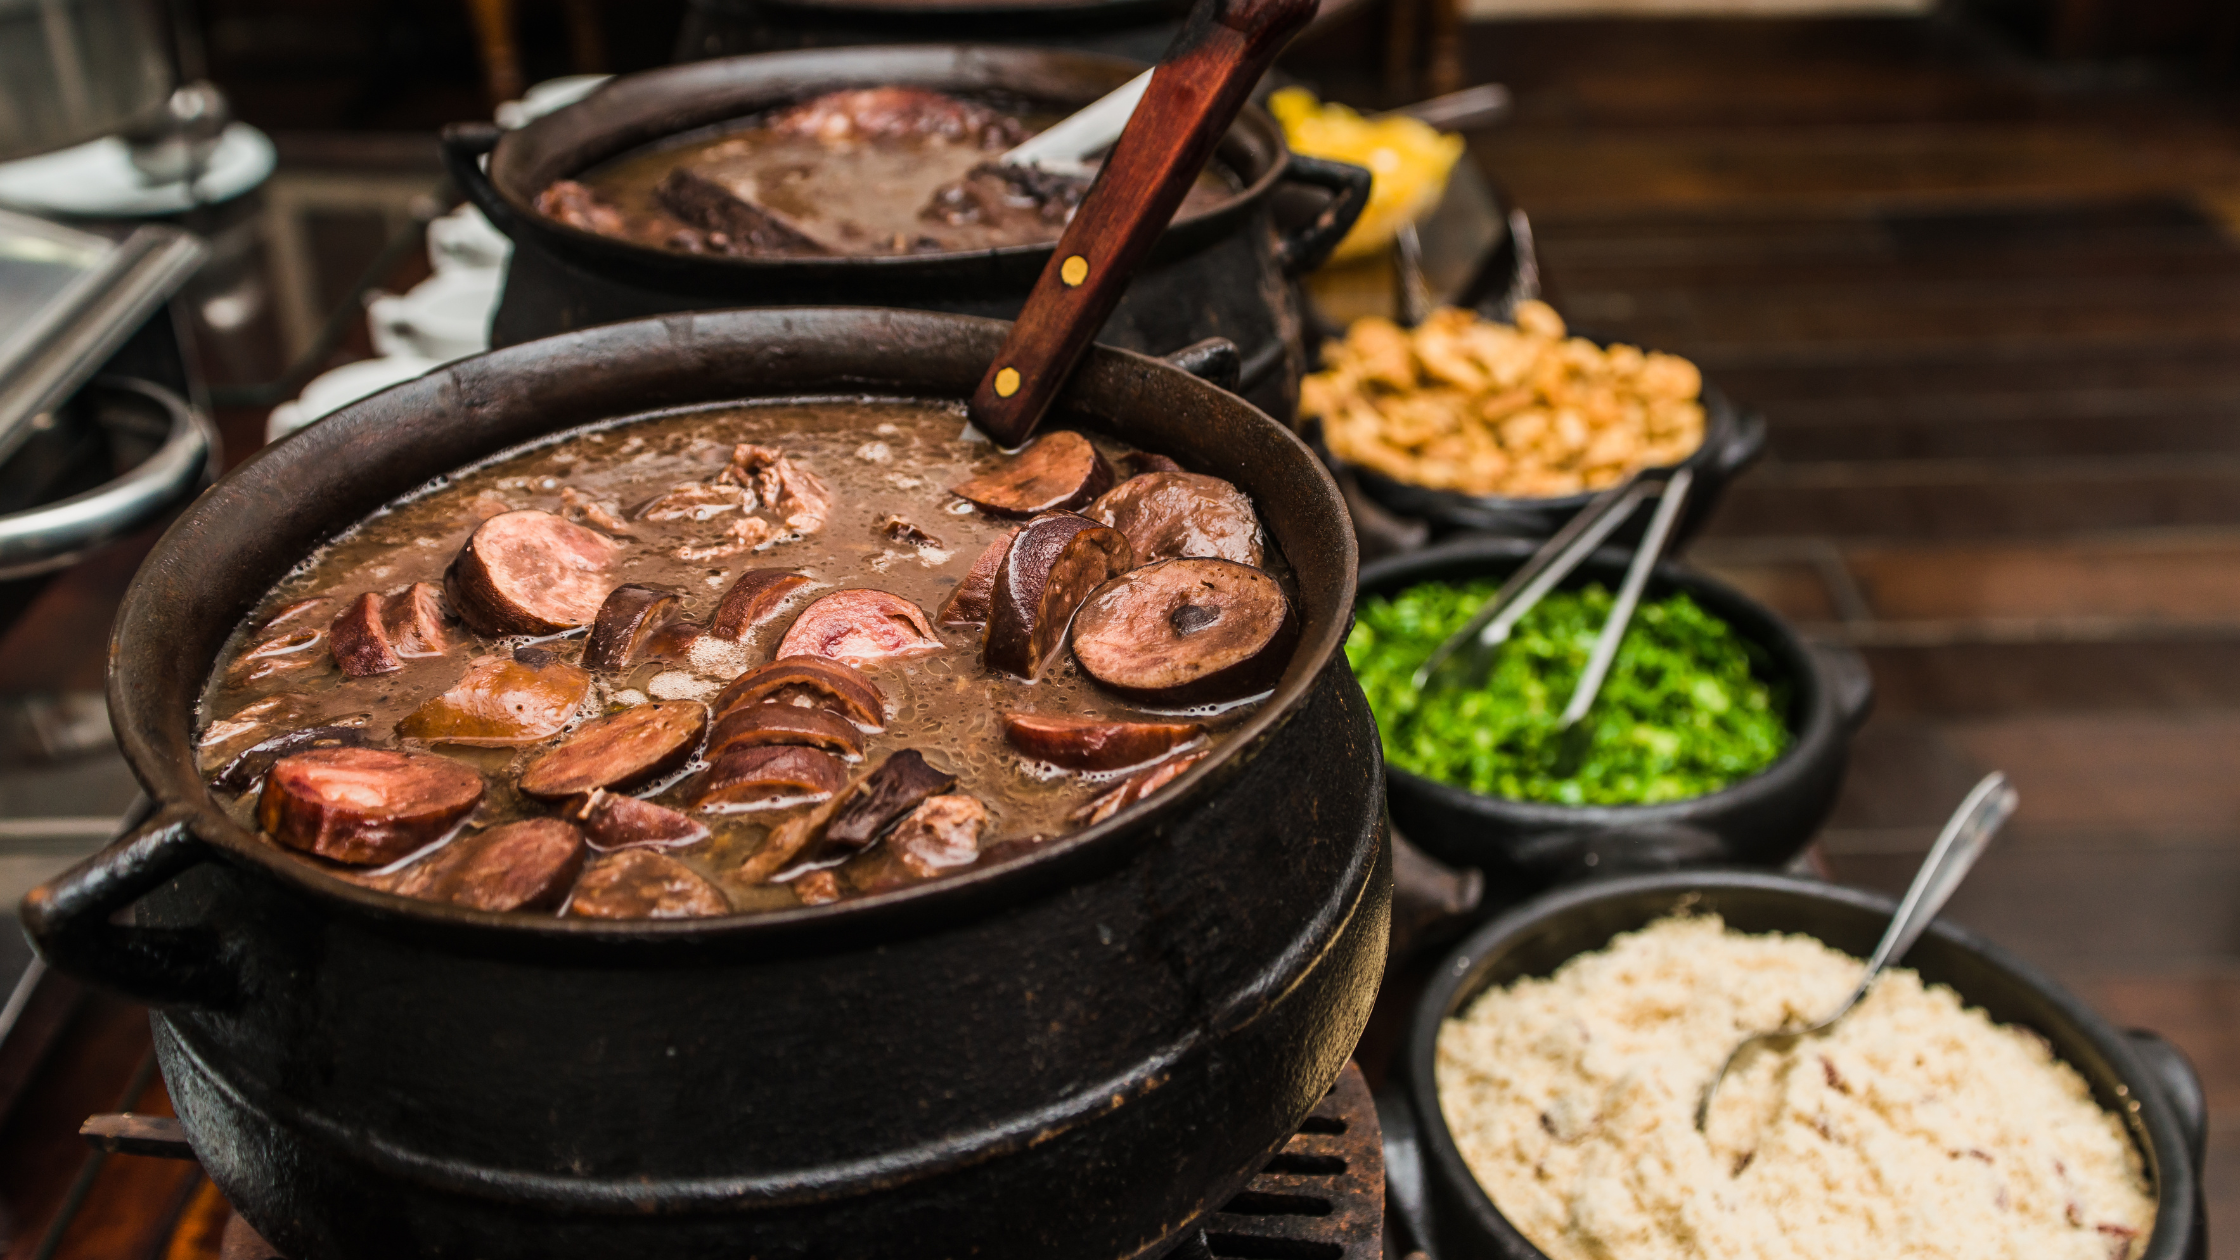 Image of feijoada and side dishes